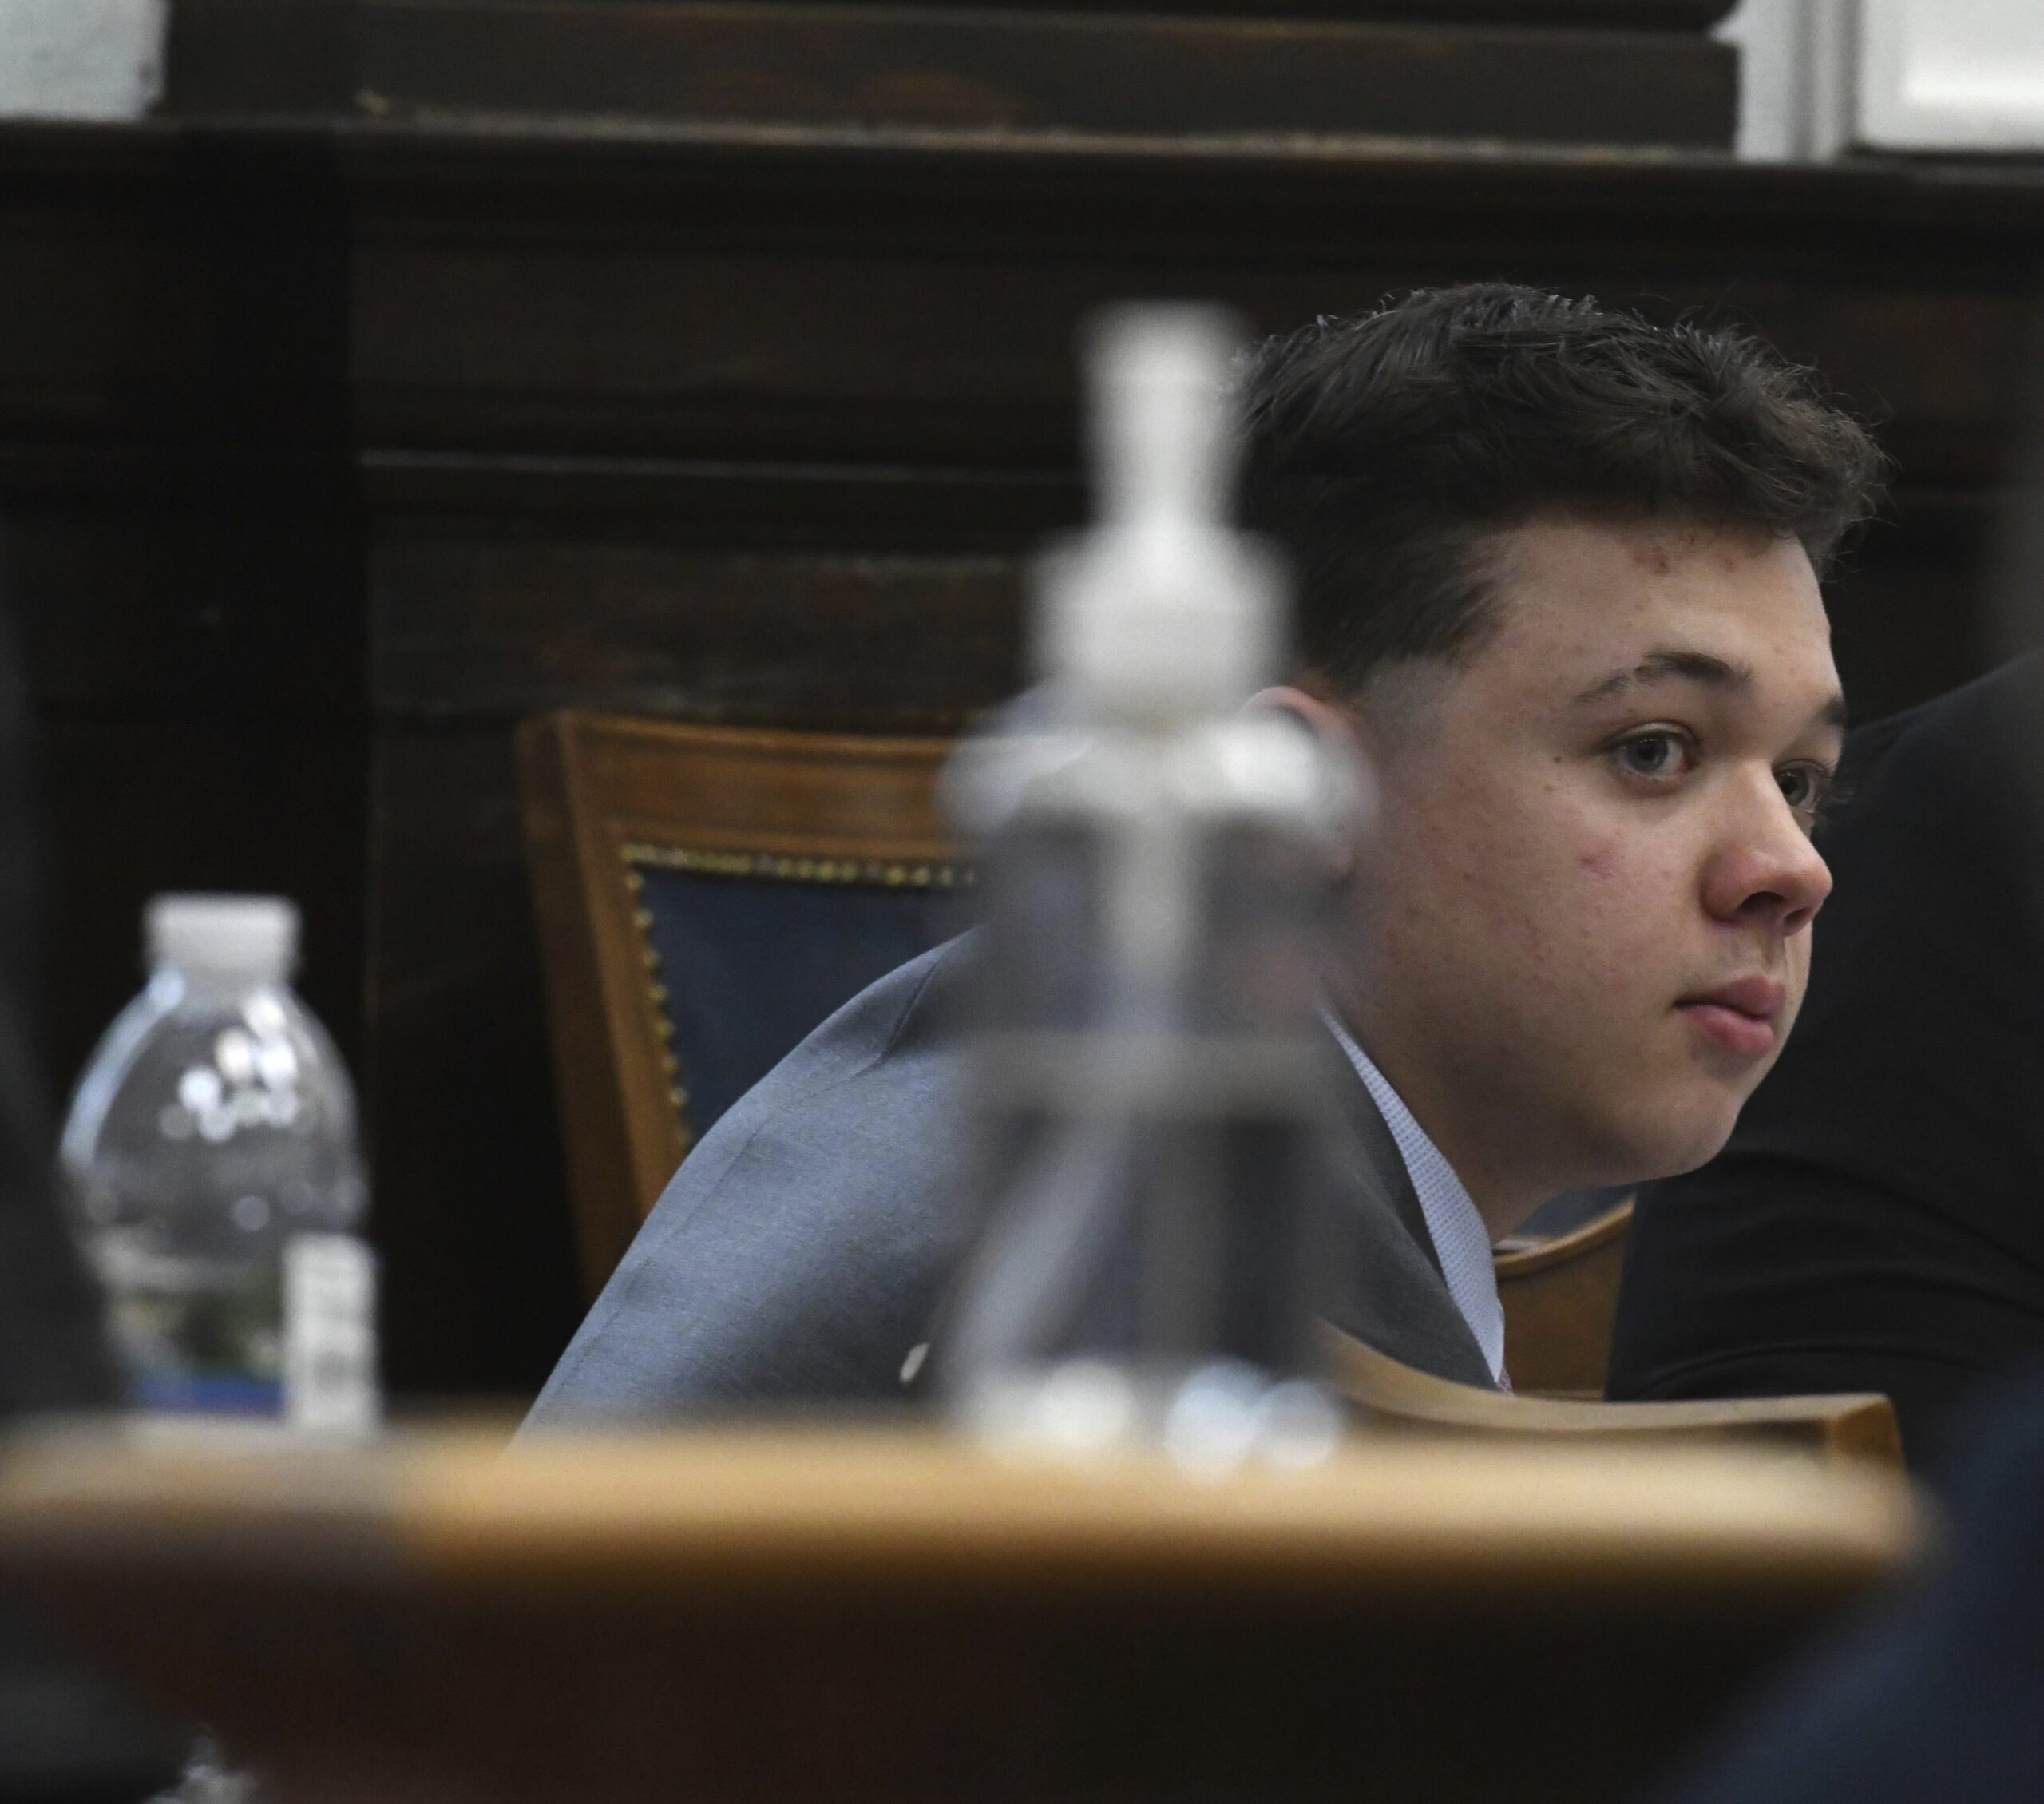 Kyle Rittenhouse attends jury selection on the first day of his trial at the Kenosha County Courthouse